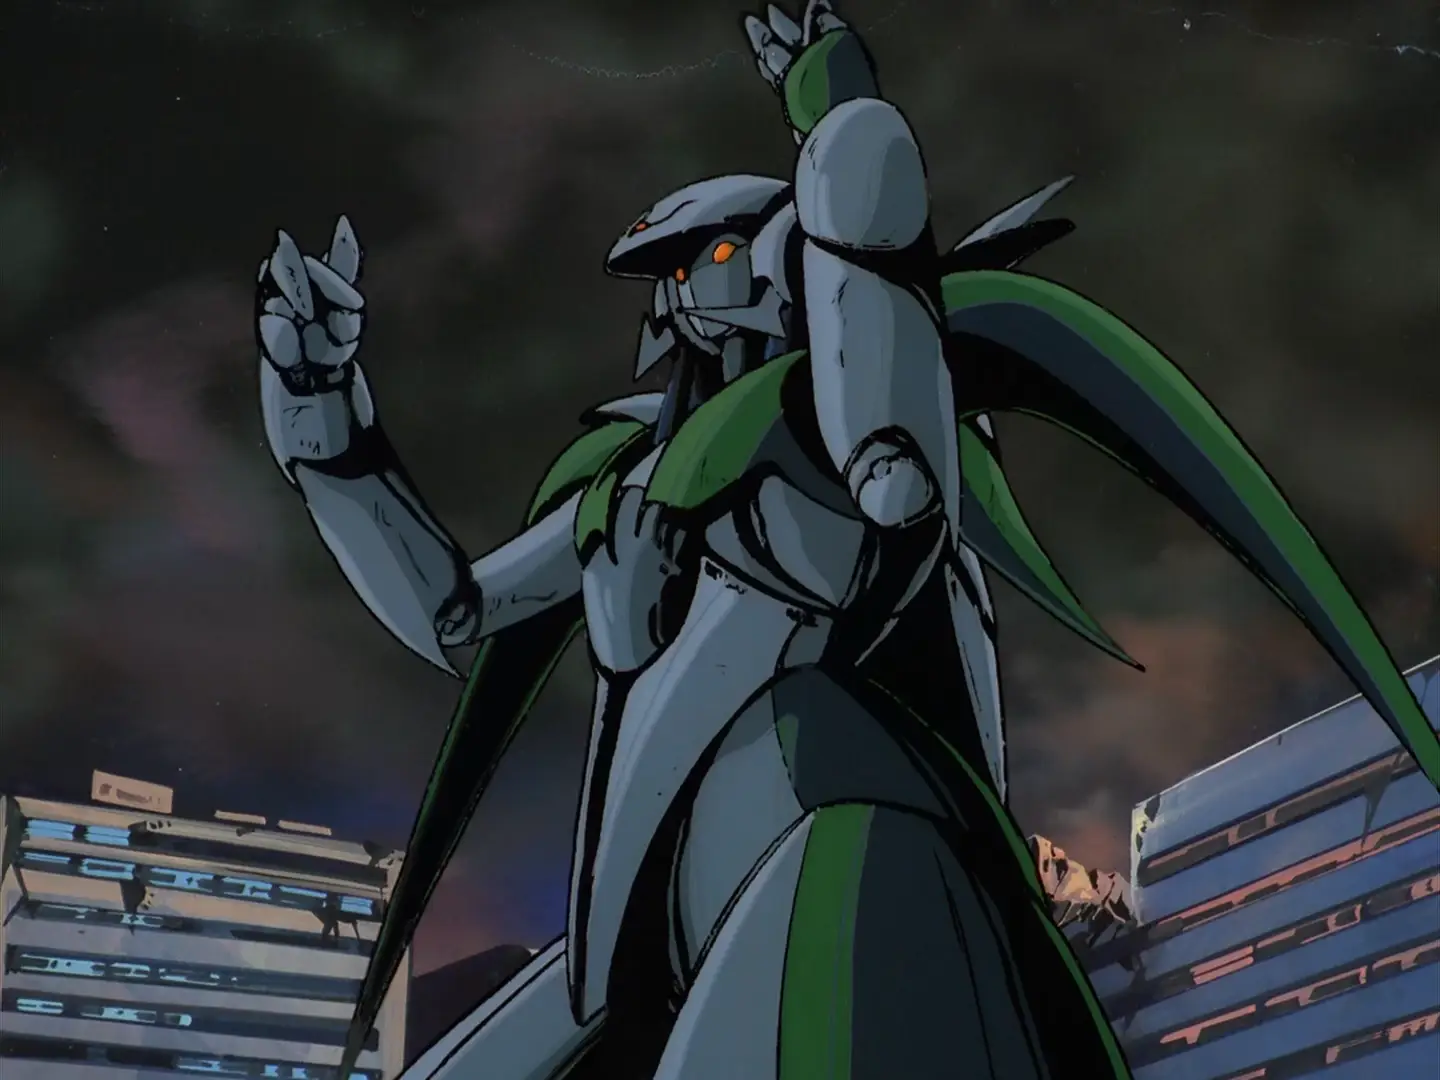 Still from Iczer One (1985). The robot Iczer One is shot from a low angle against a cloudy sky, its fists raised.